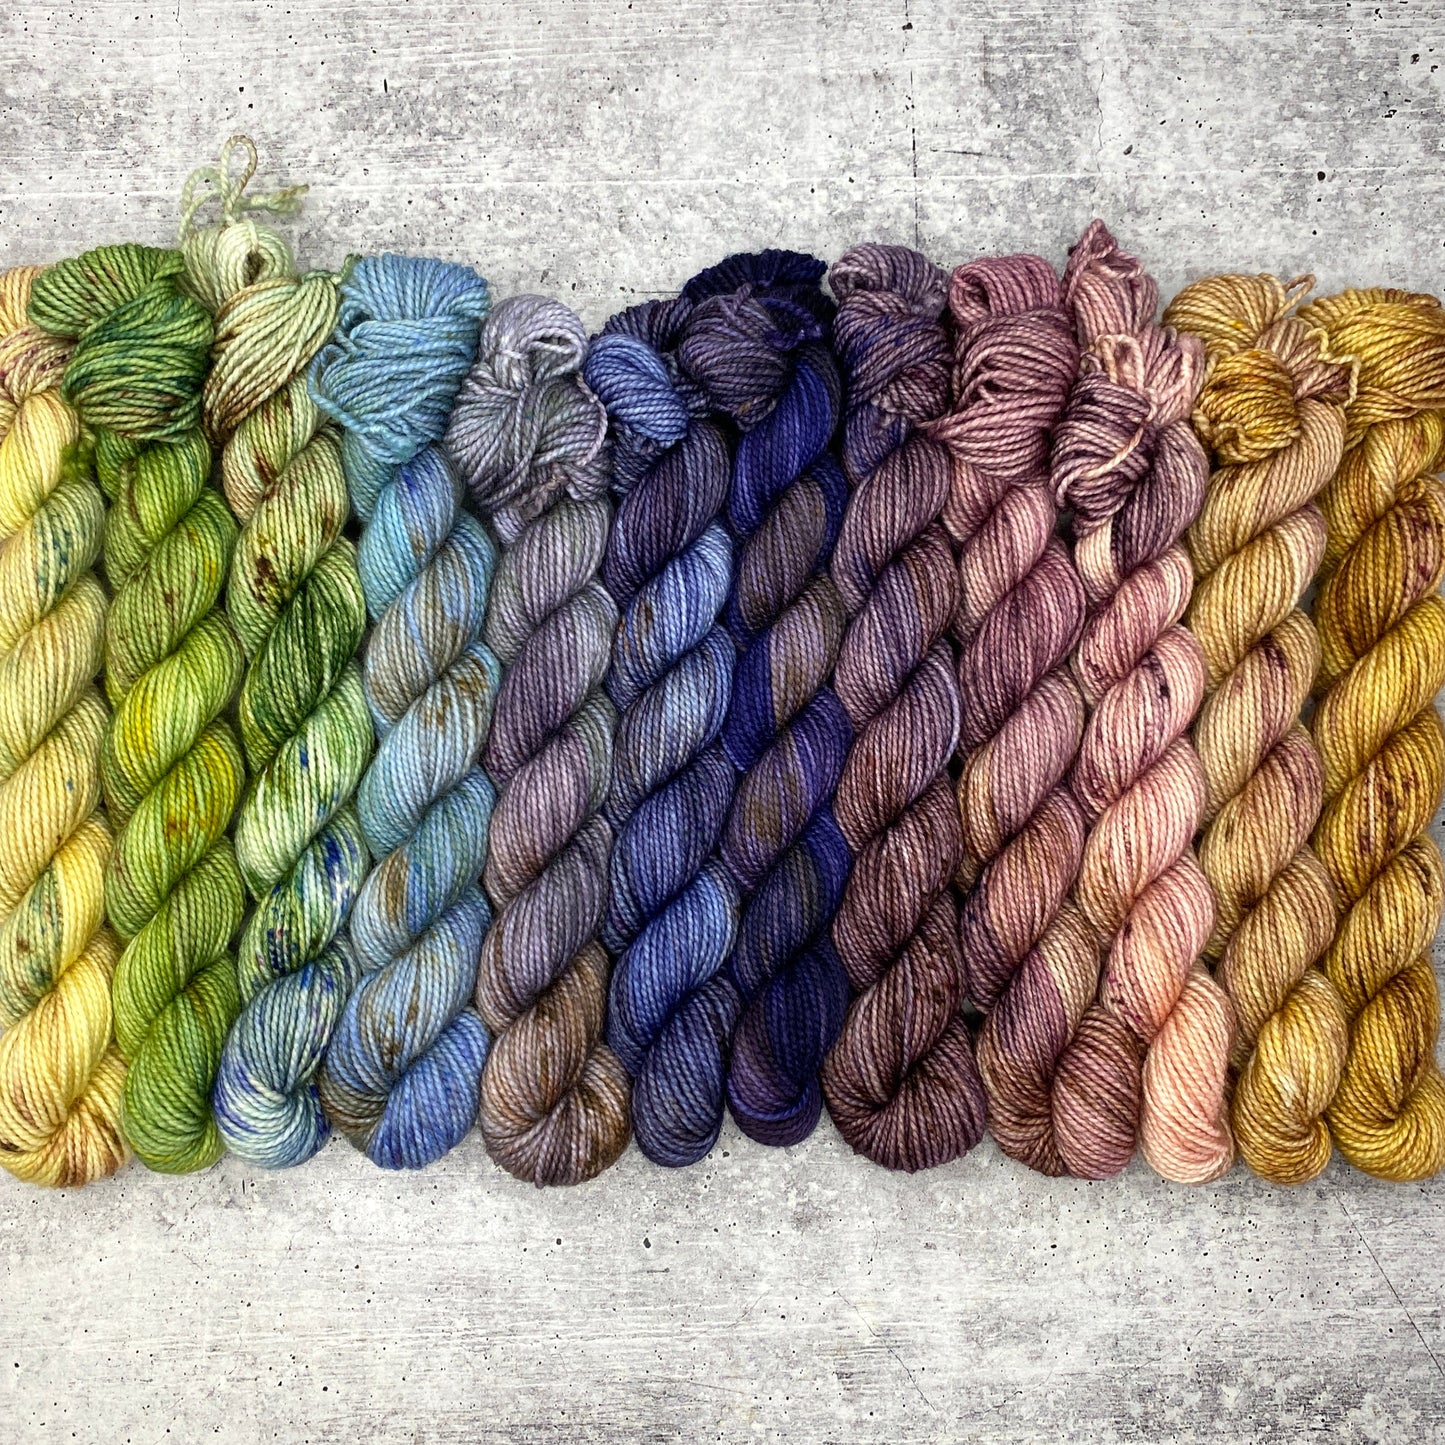 Mini Skeins - Daydreamer Set, Packaged as Braid - Ready to Ship